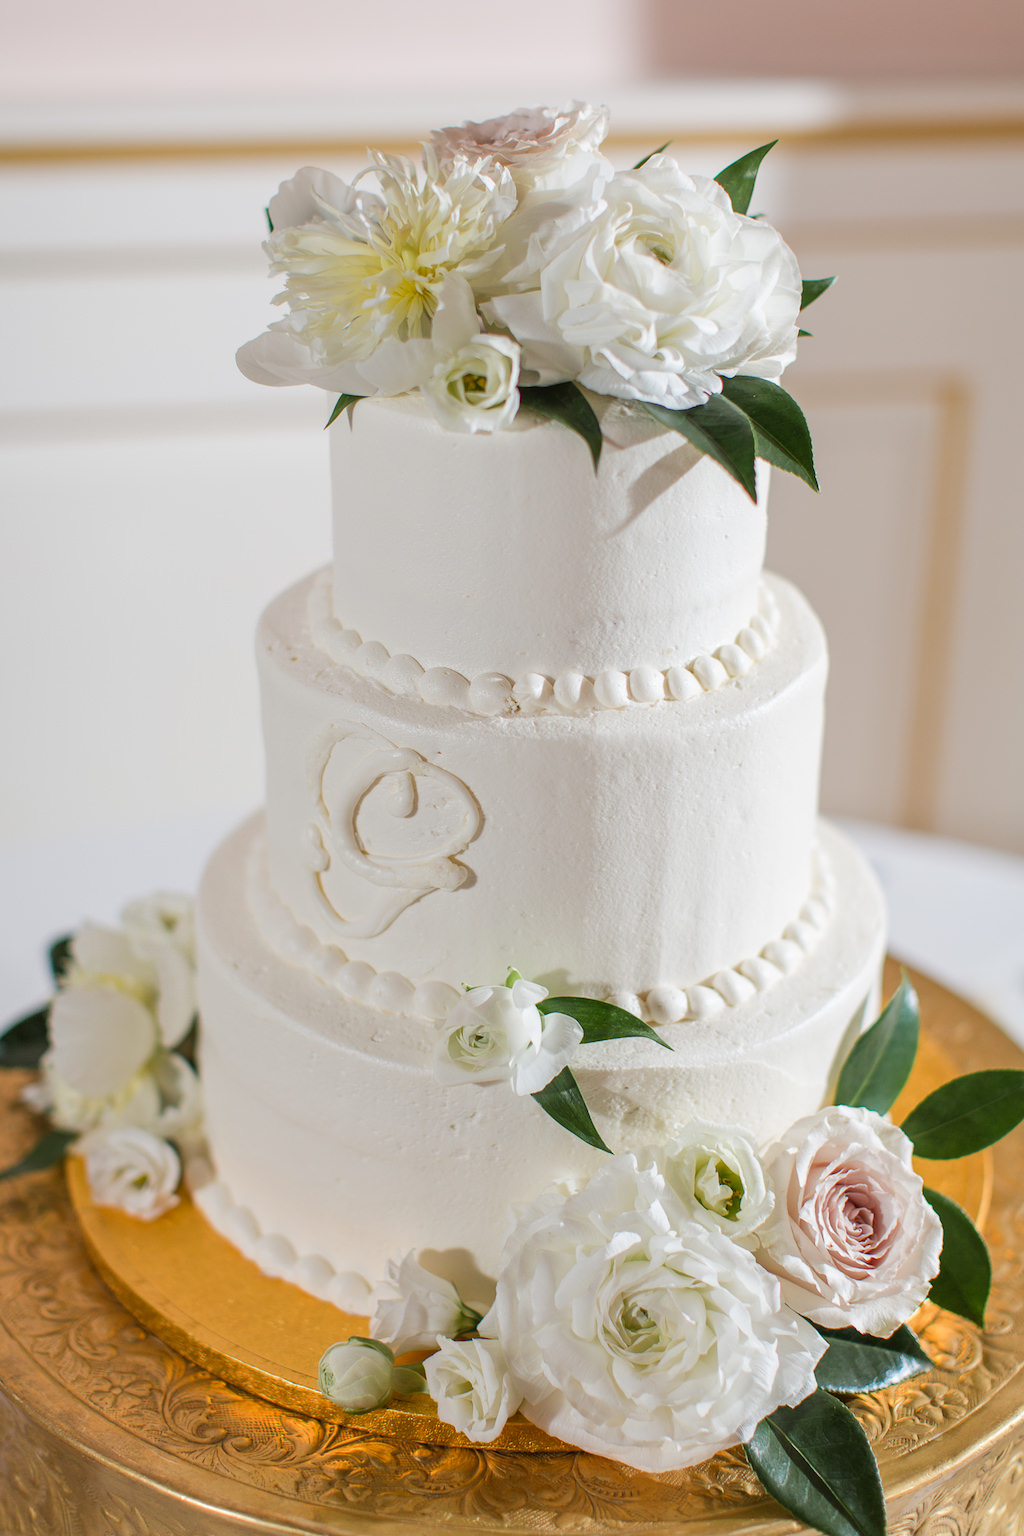 Classic White Three Tier Round Wedding Cake with Monogram and Garnished with Real White and Blush Pink Flowers